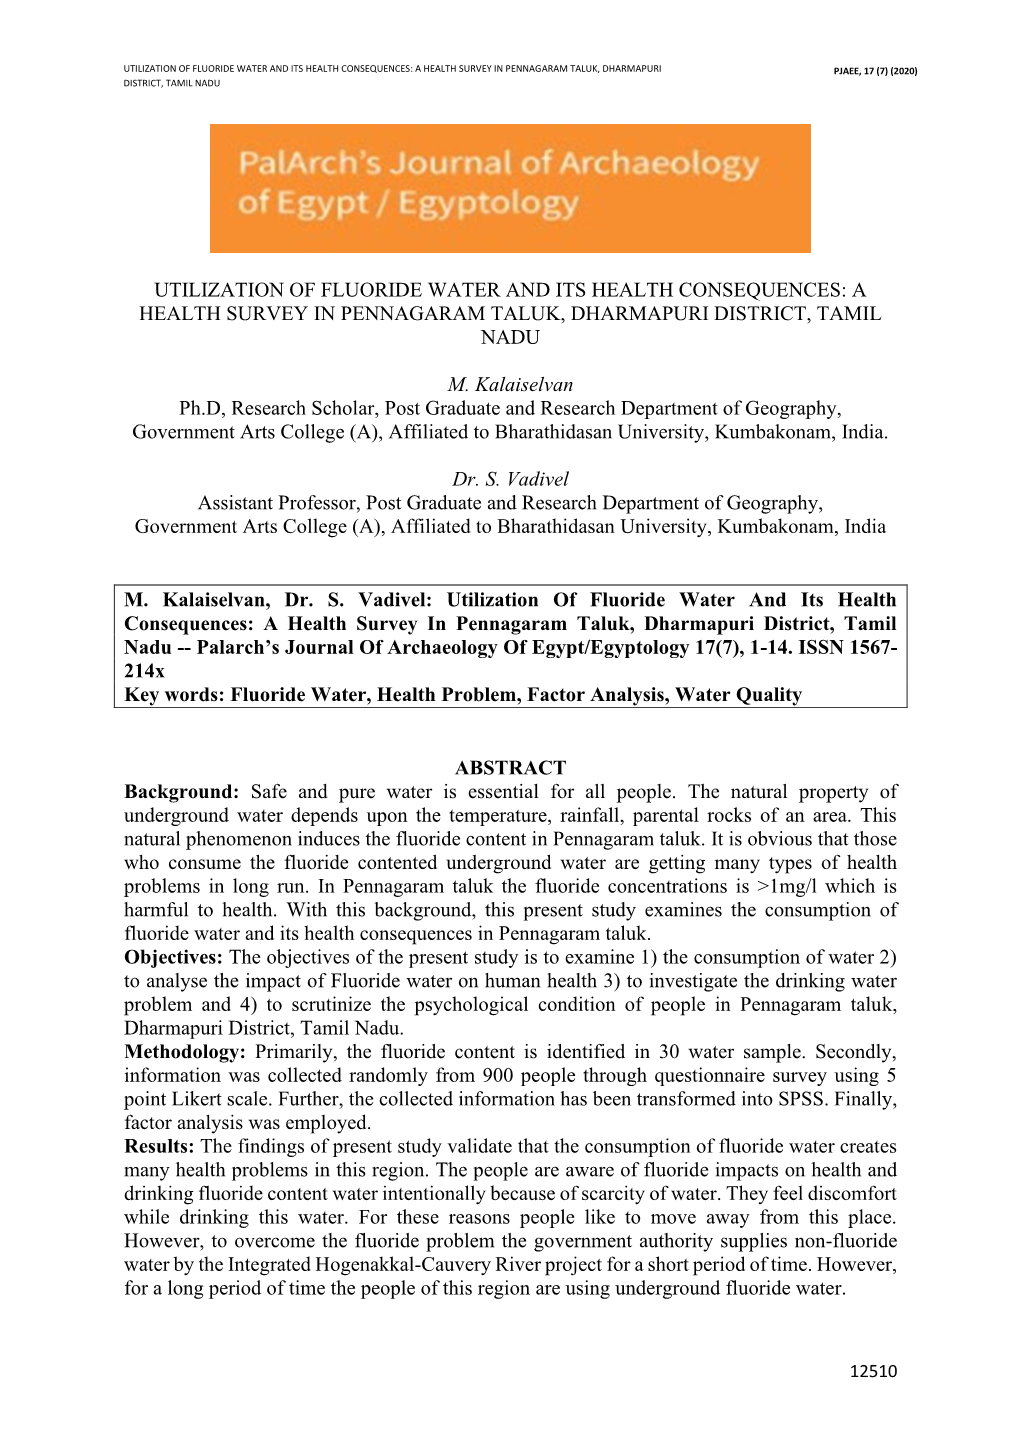 Utilization of Fluoride Water and Its Health Consequences: a Health Survey in Pennagaram Taluk, Dharmapuri Pjaee, 17 (7) (2020) District, Tamil Nadu